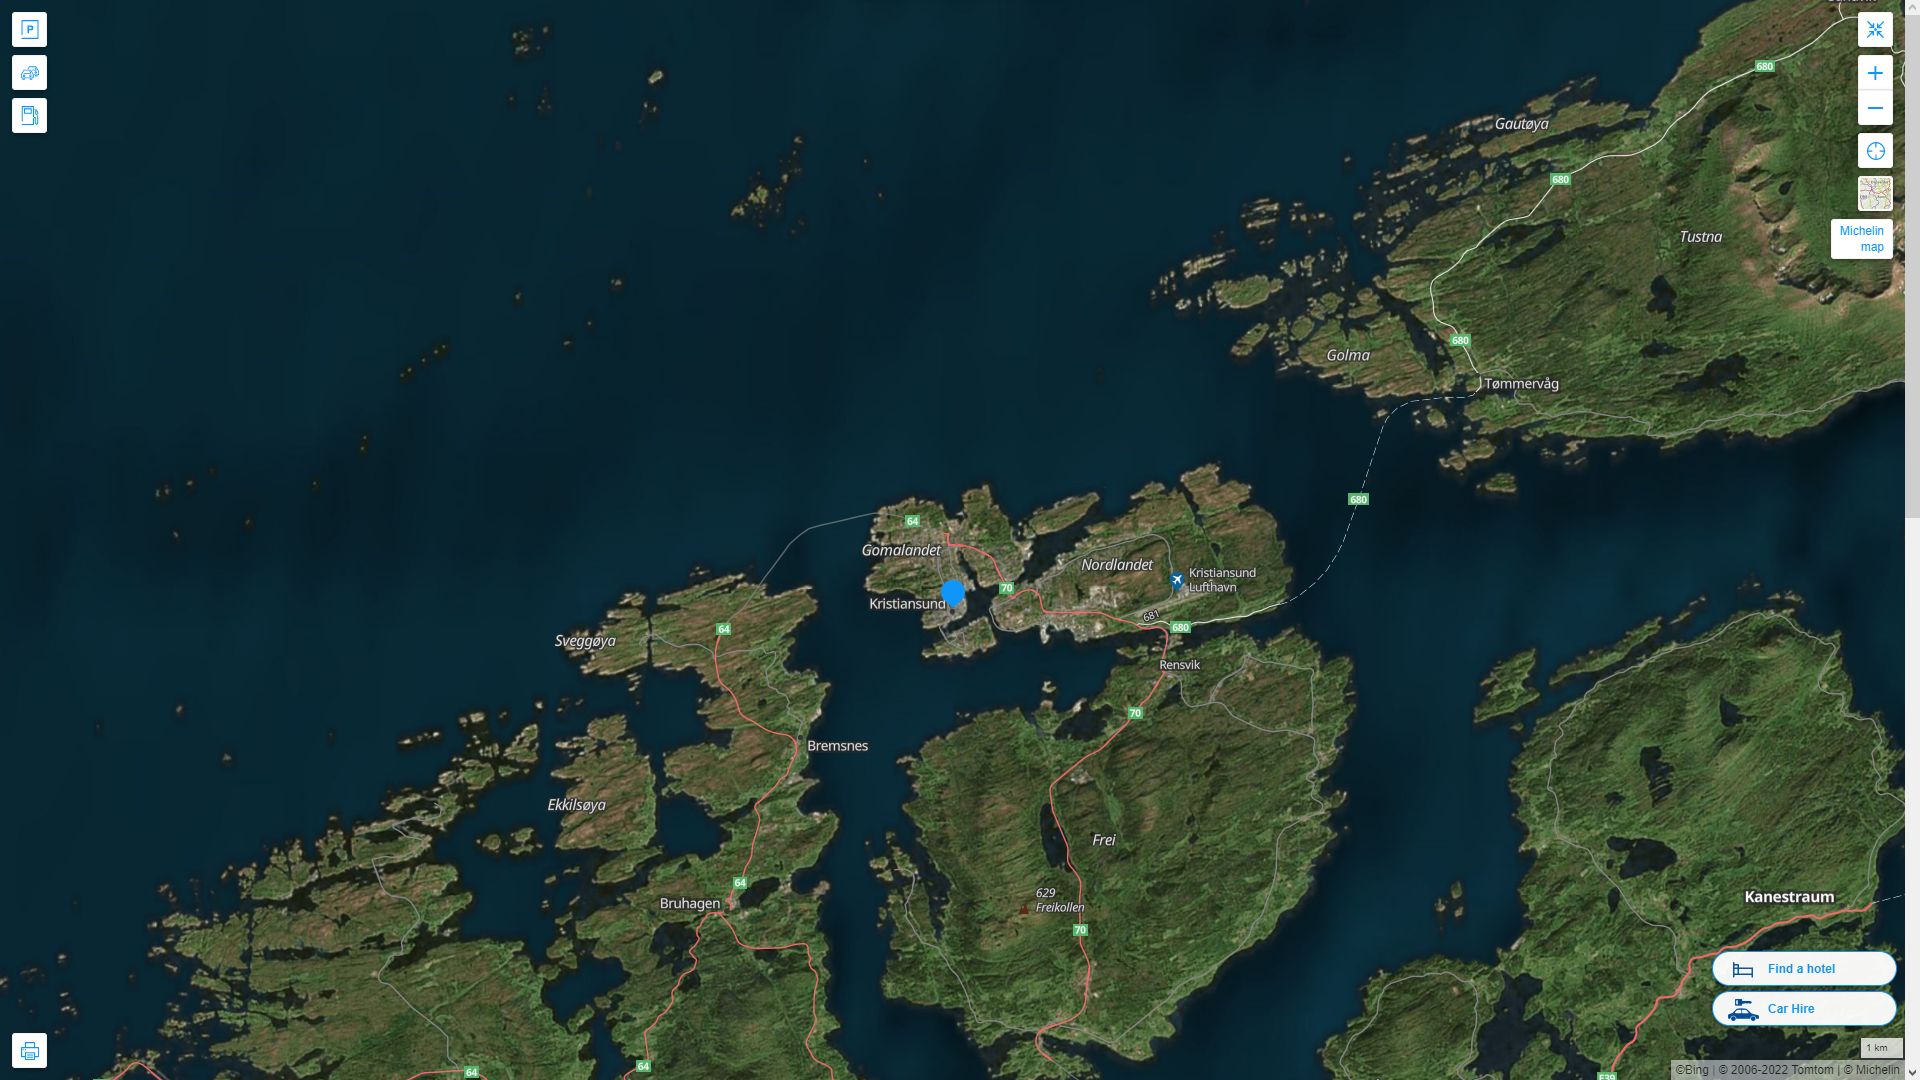 Kristiansund Highway and Road Map with Satellite View